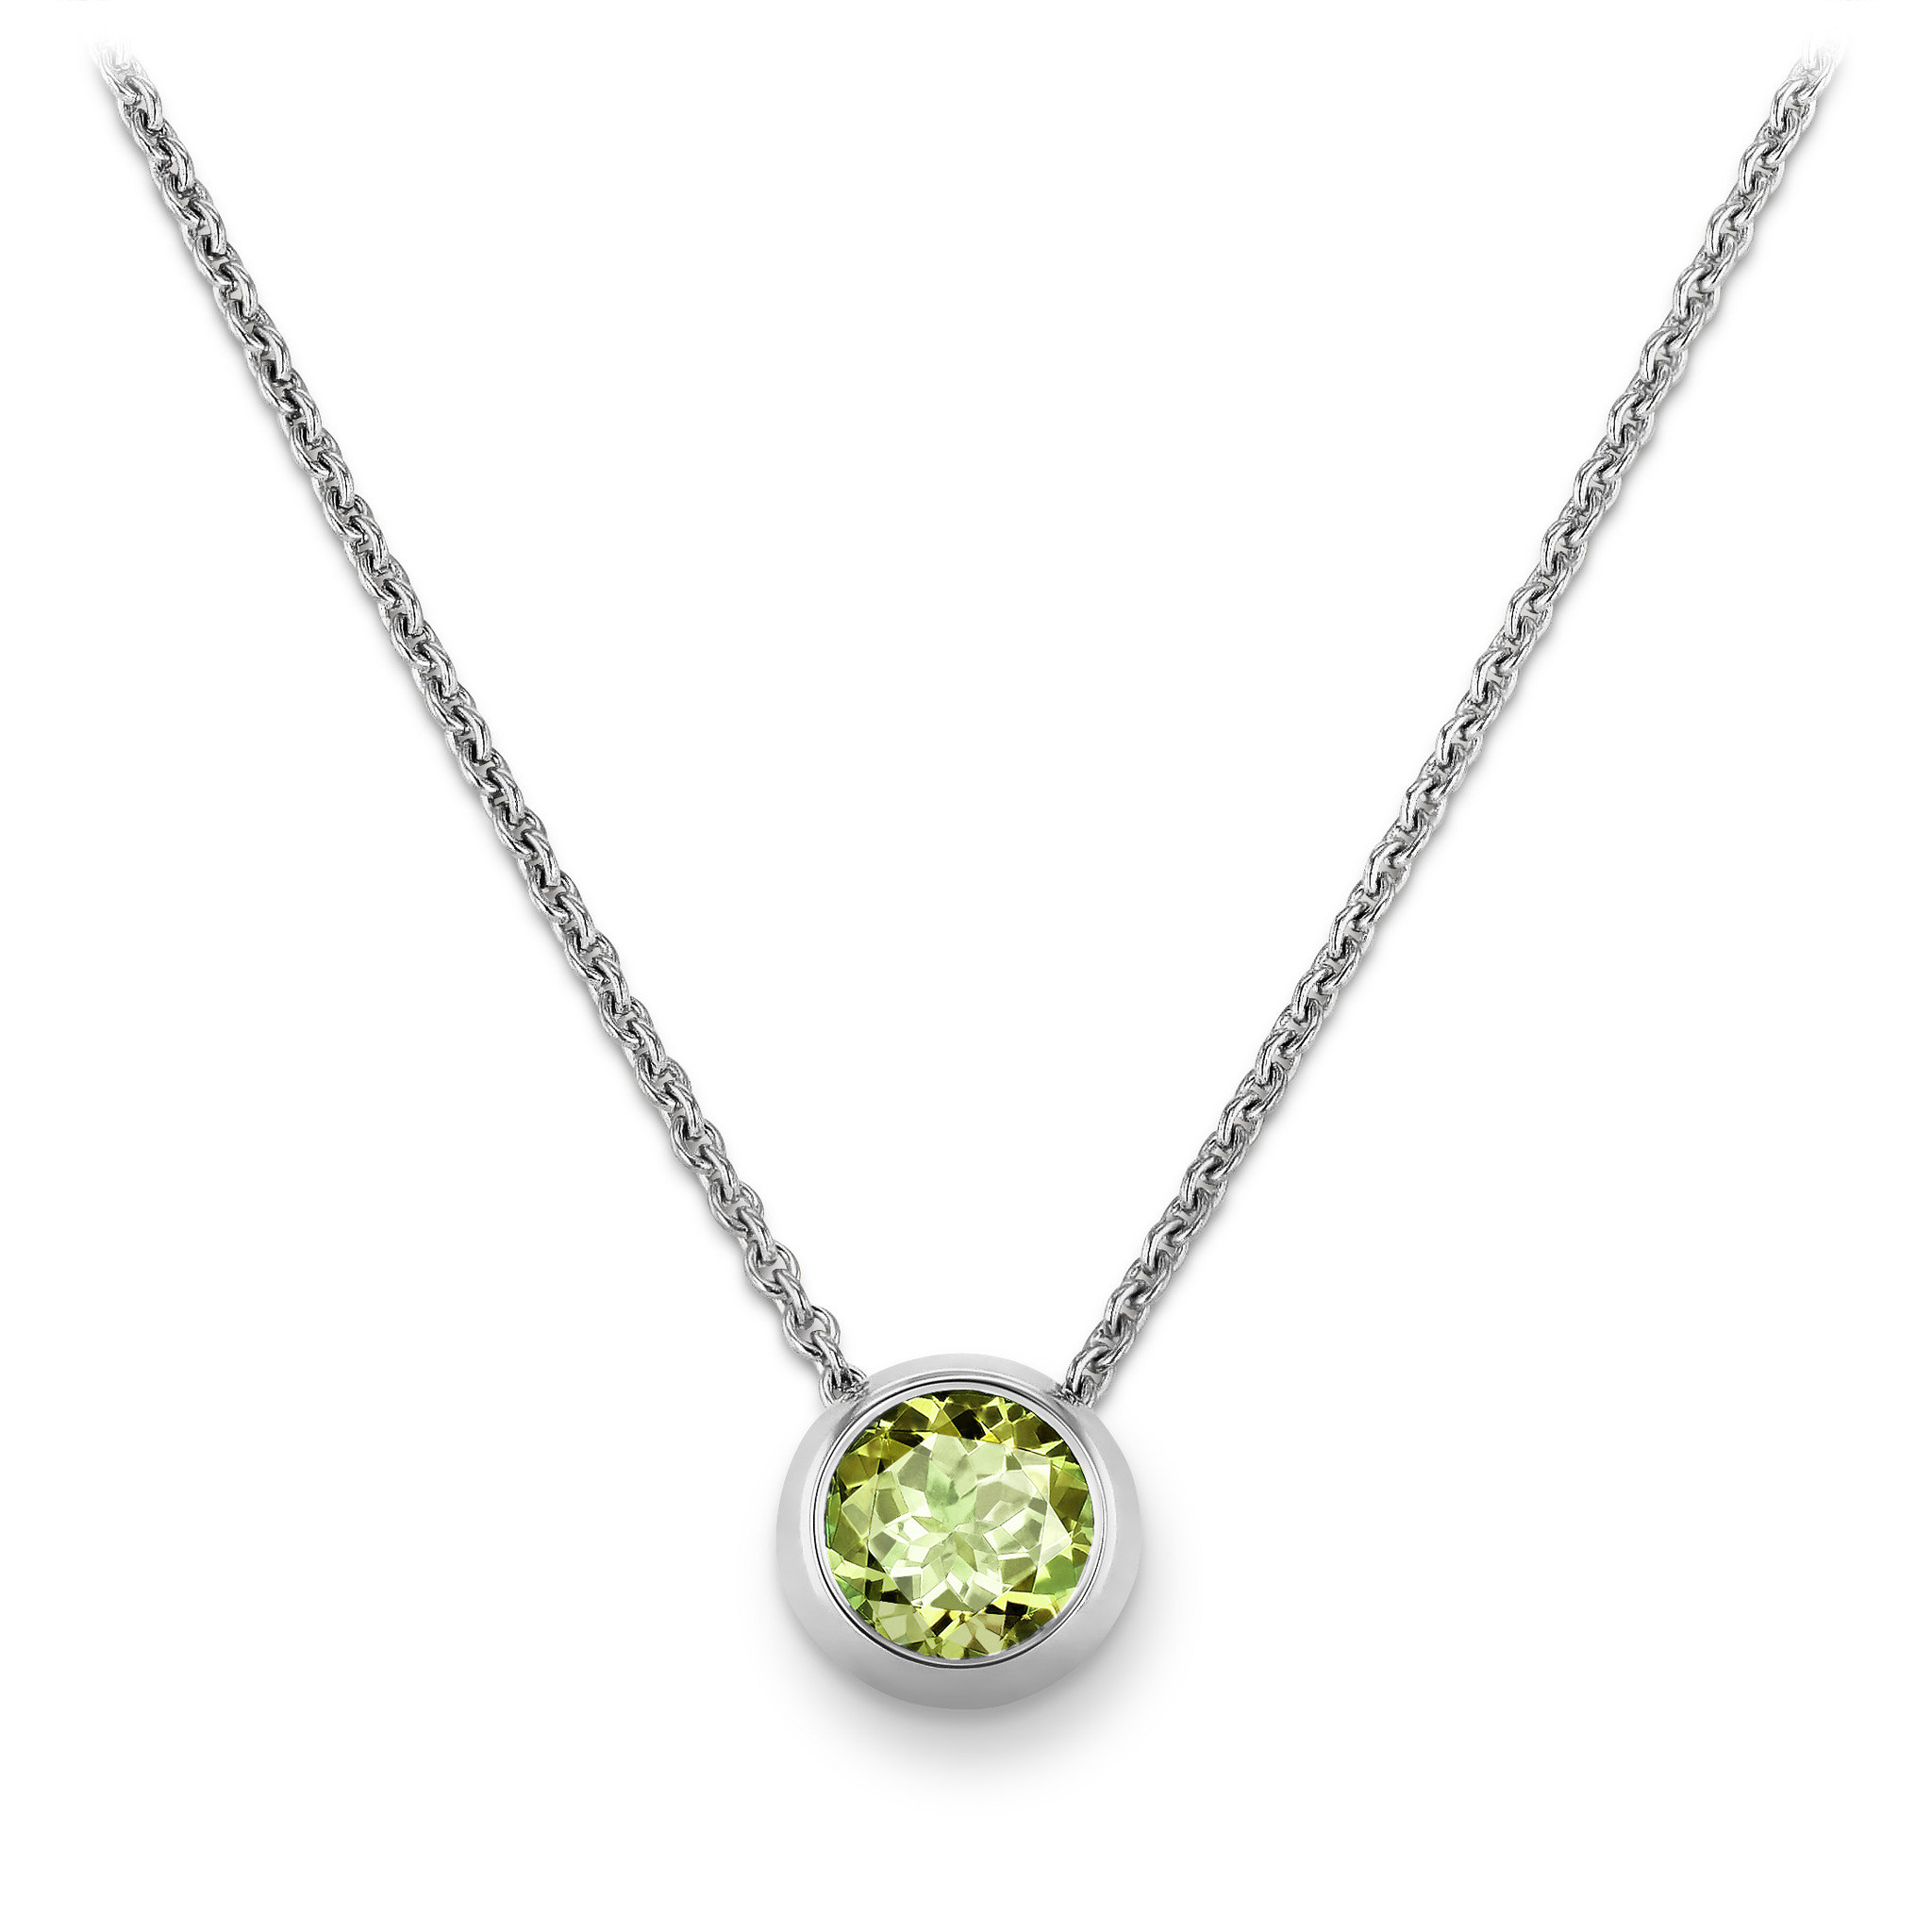 Necklace with tourmaline